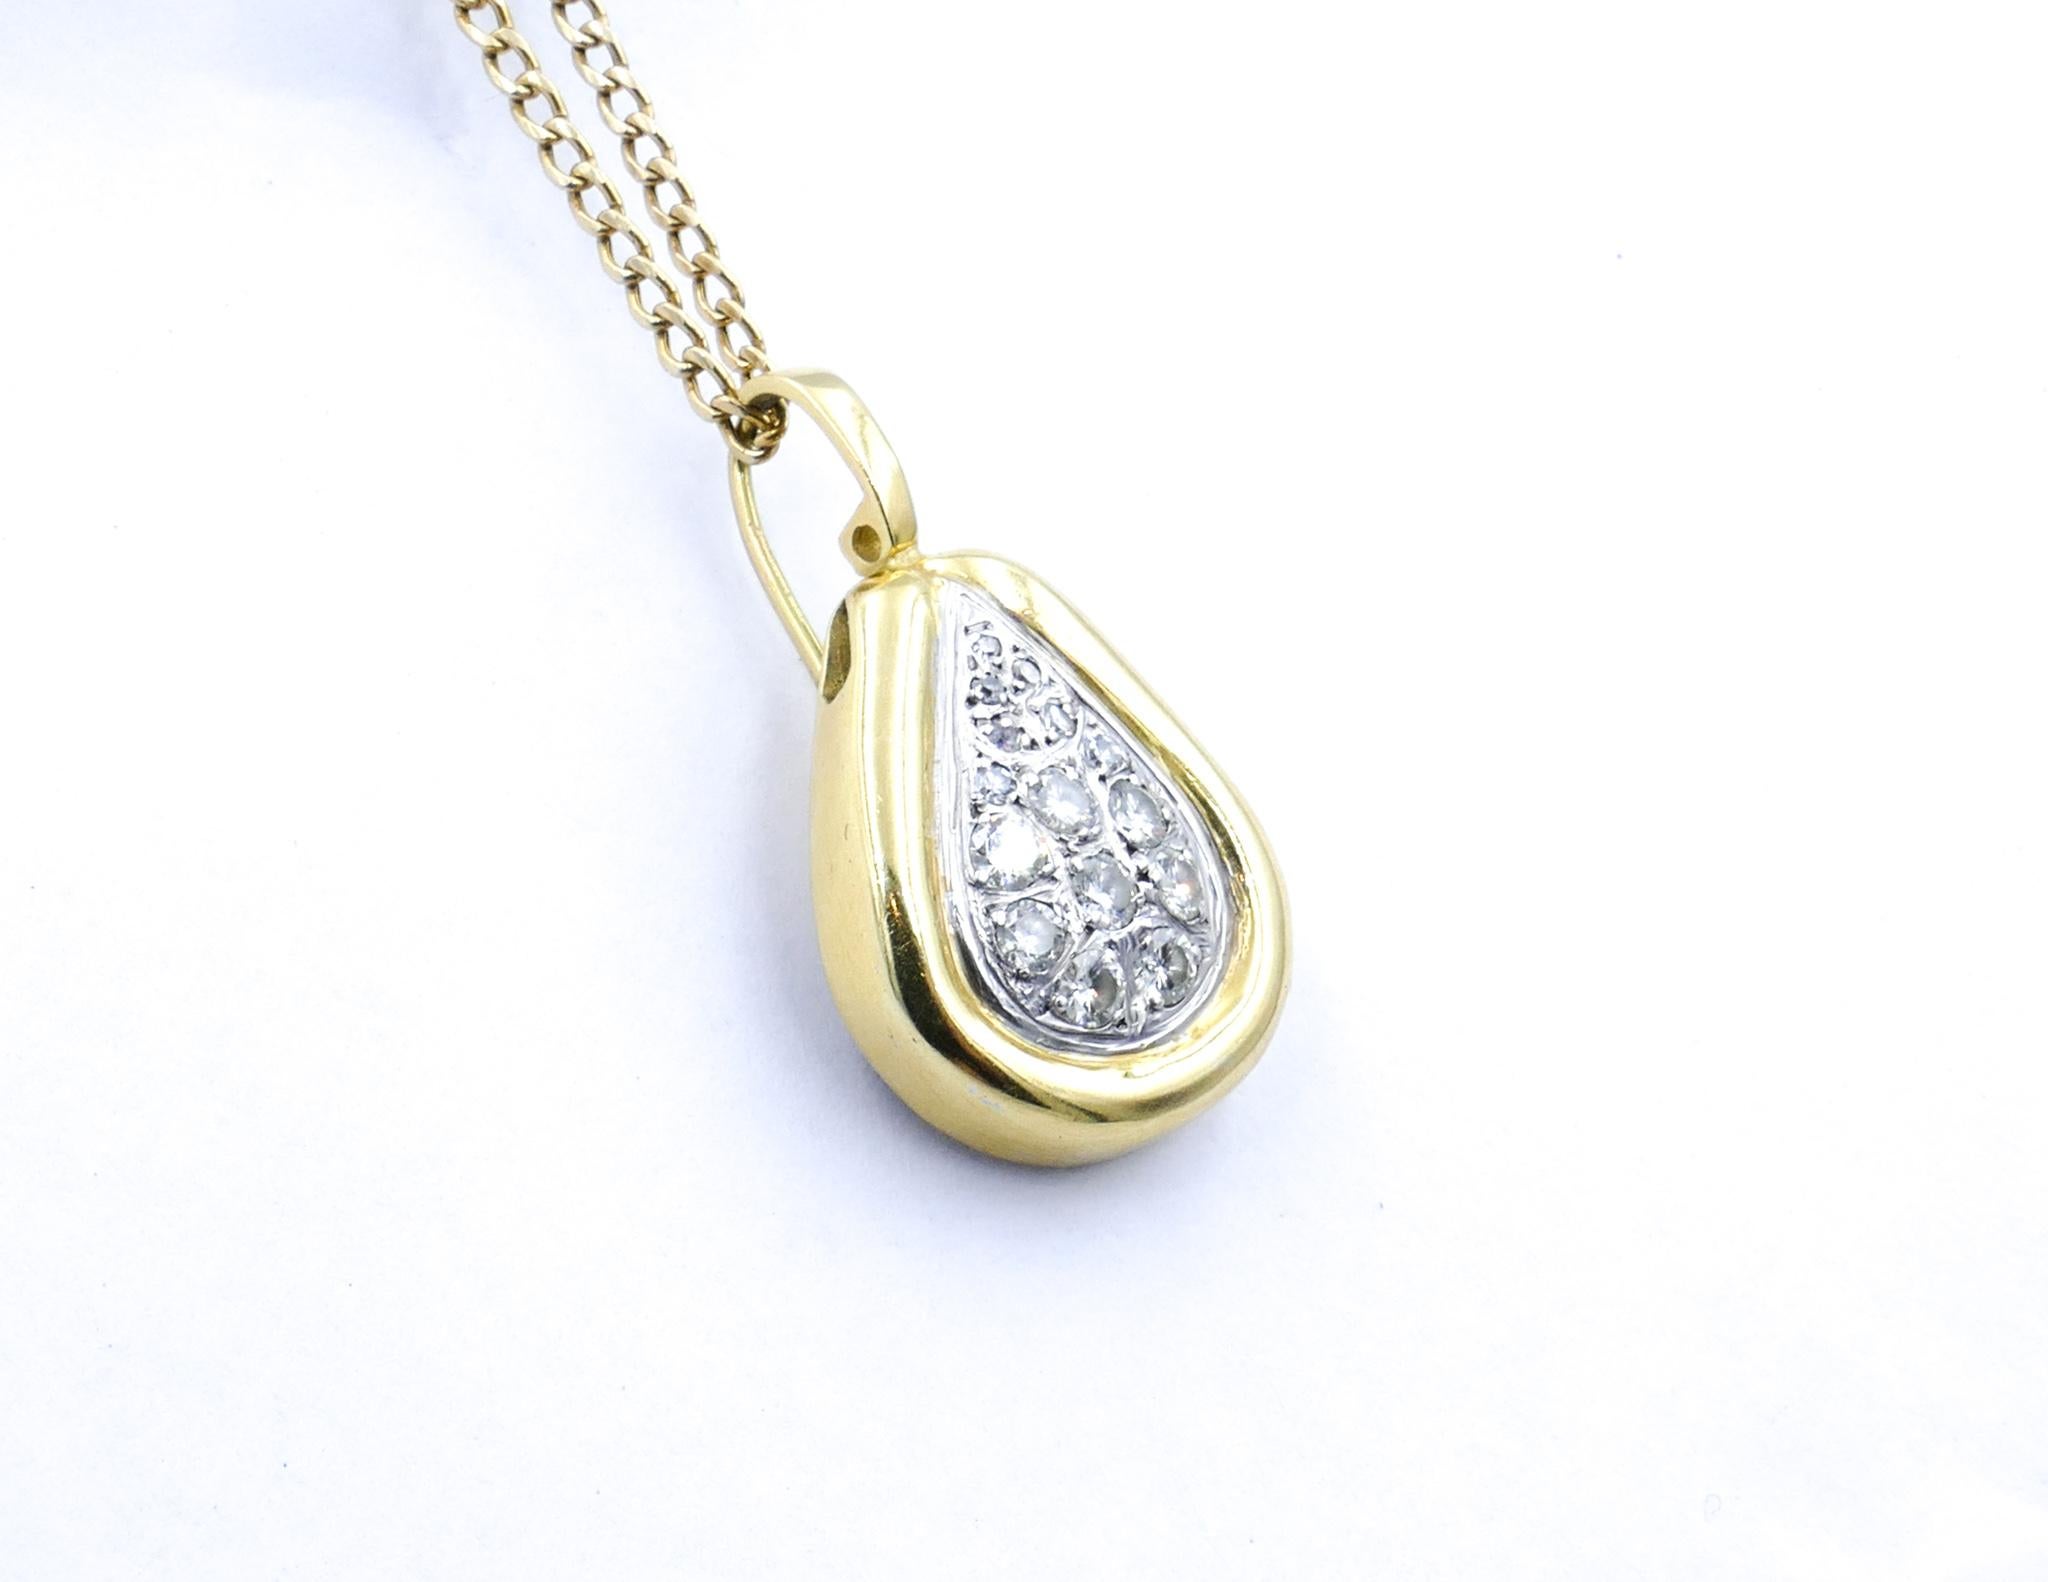 The quality of the Diamonds in this very functional Pendant/Enhancer range from F to H & total just on 1 carat.
 It is a most attractive jewellery Item designed & made probably in the late 30's early 40's, is set with the Diamonds ringed by White